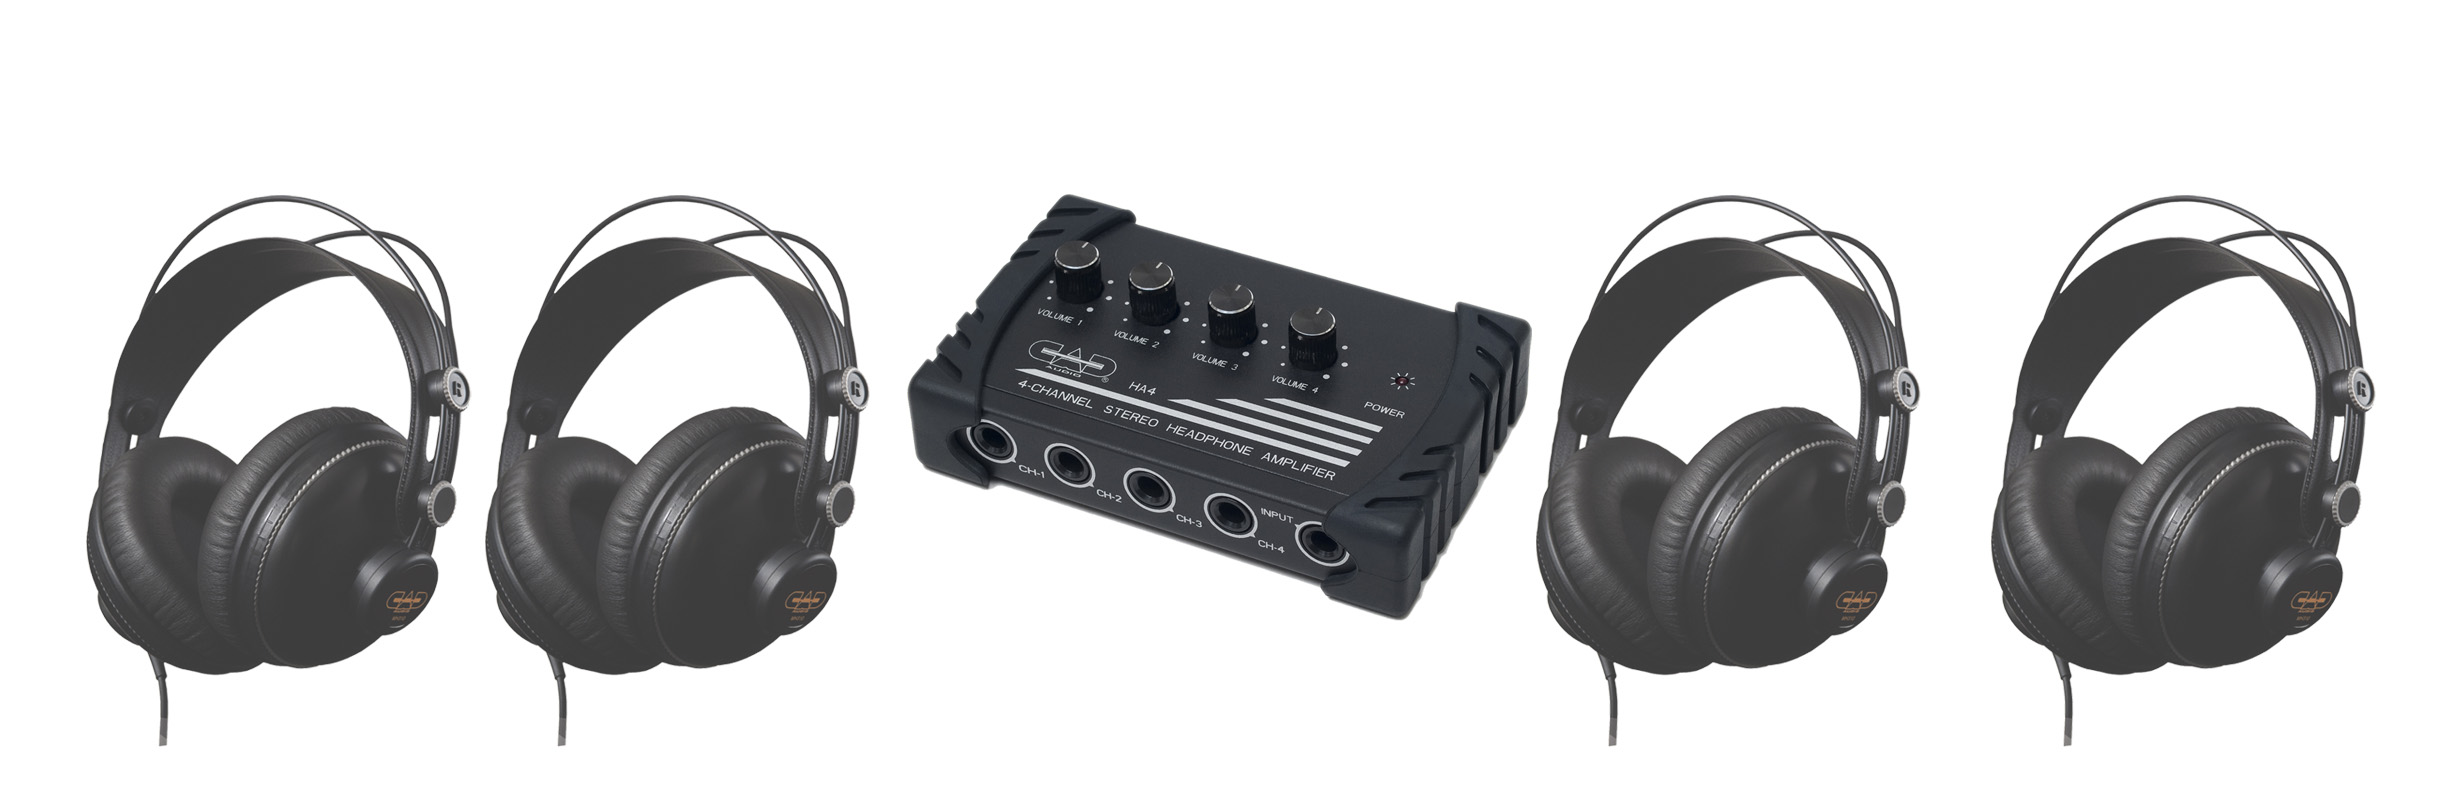 CAD CAD HP310 Headphone and Headphone Amplifier Package